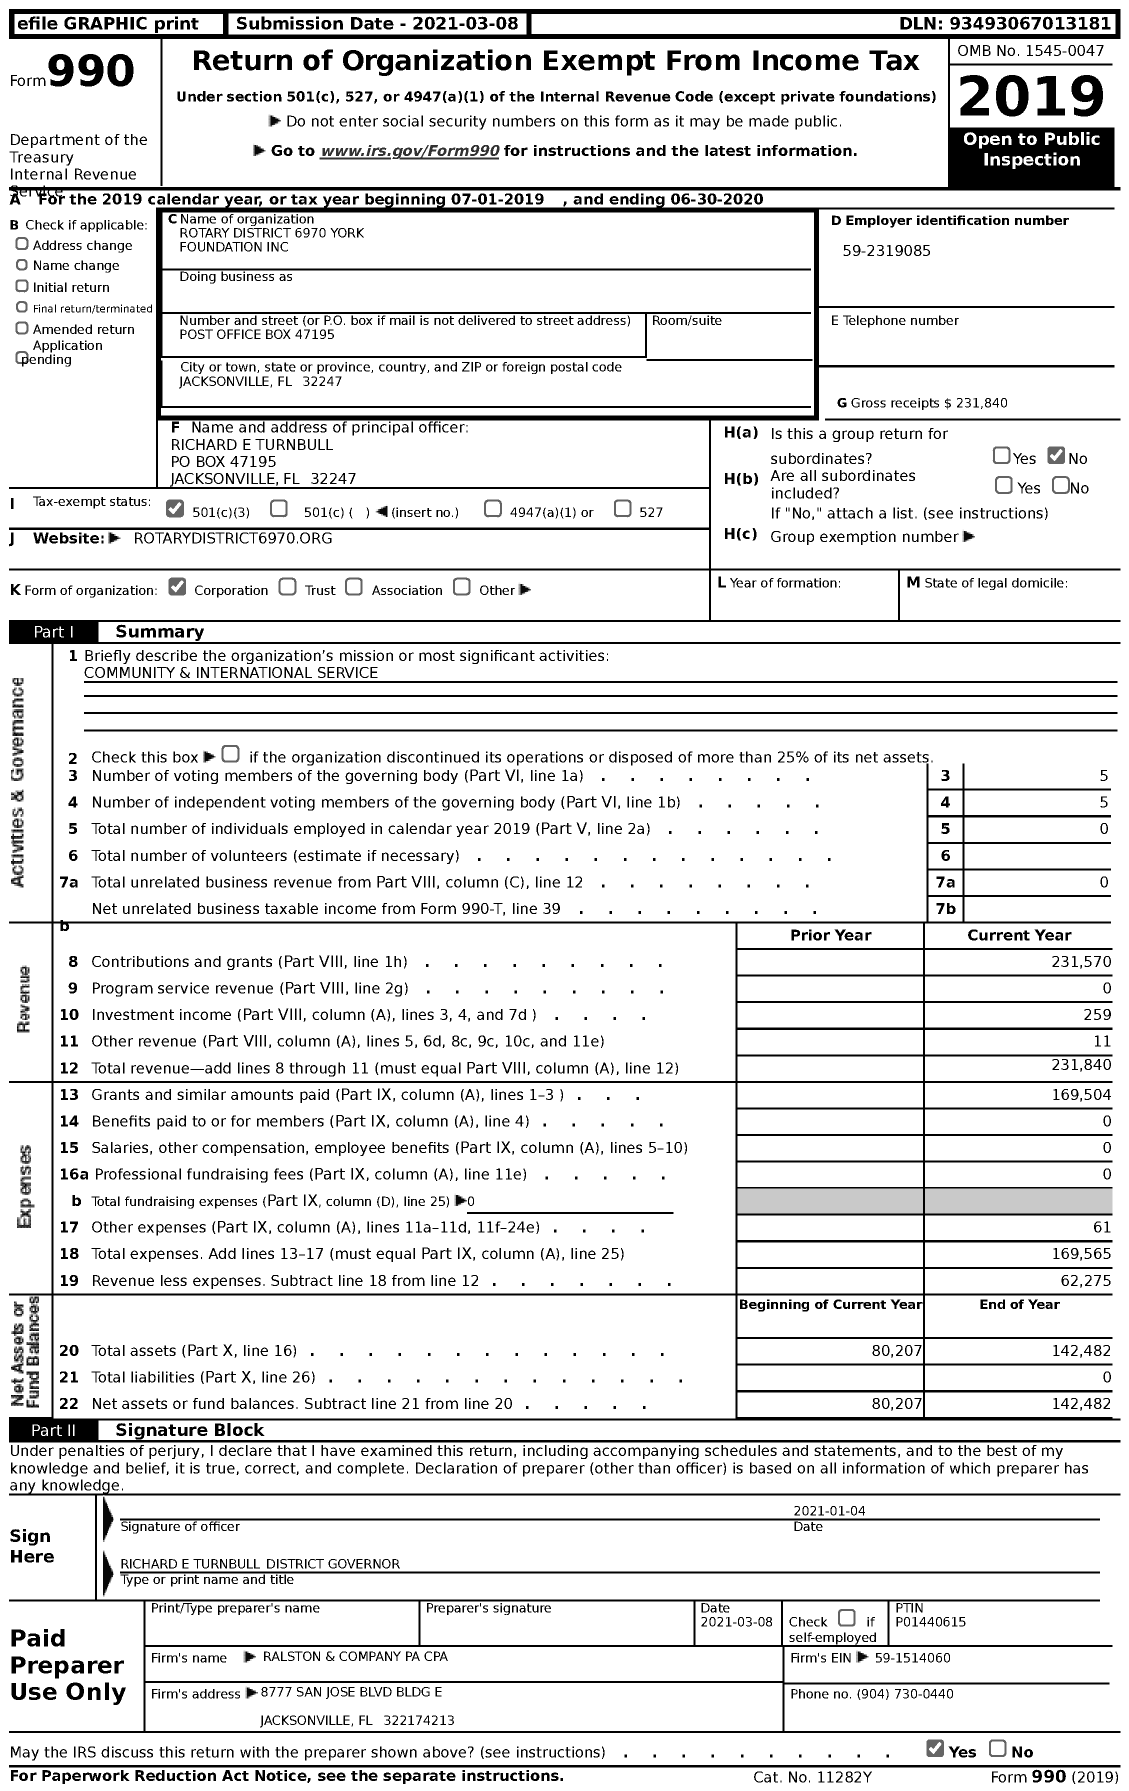 Image of first page of 2019 Form 990 for Rotary District 6970 York Foundation